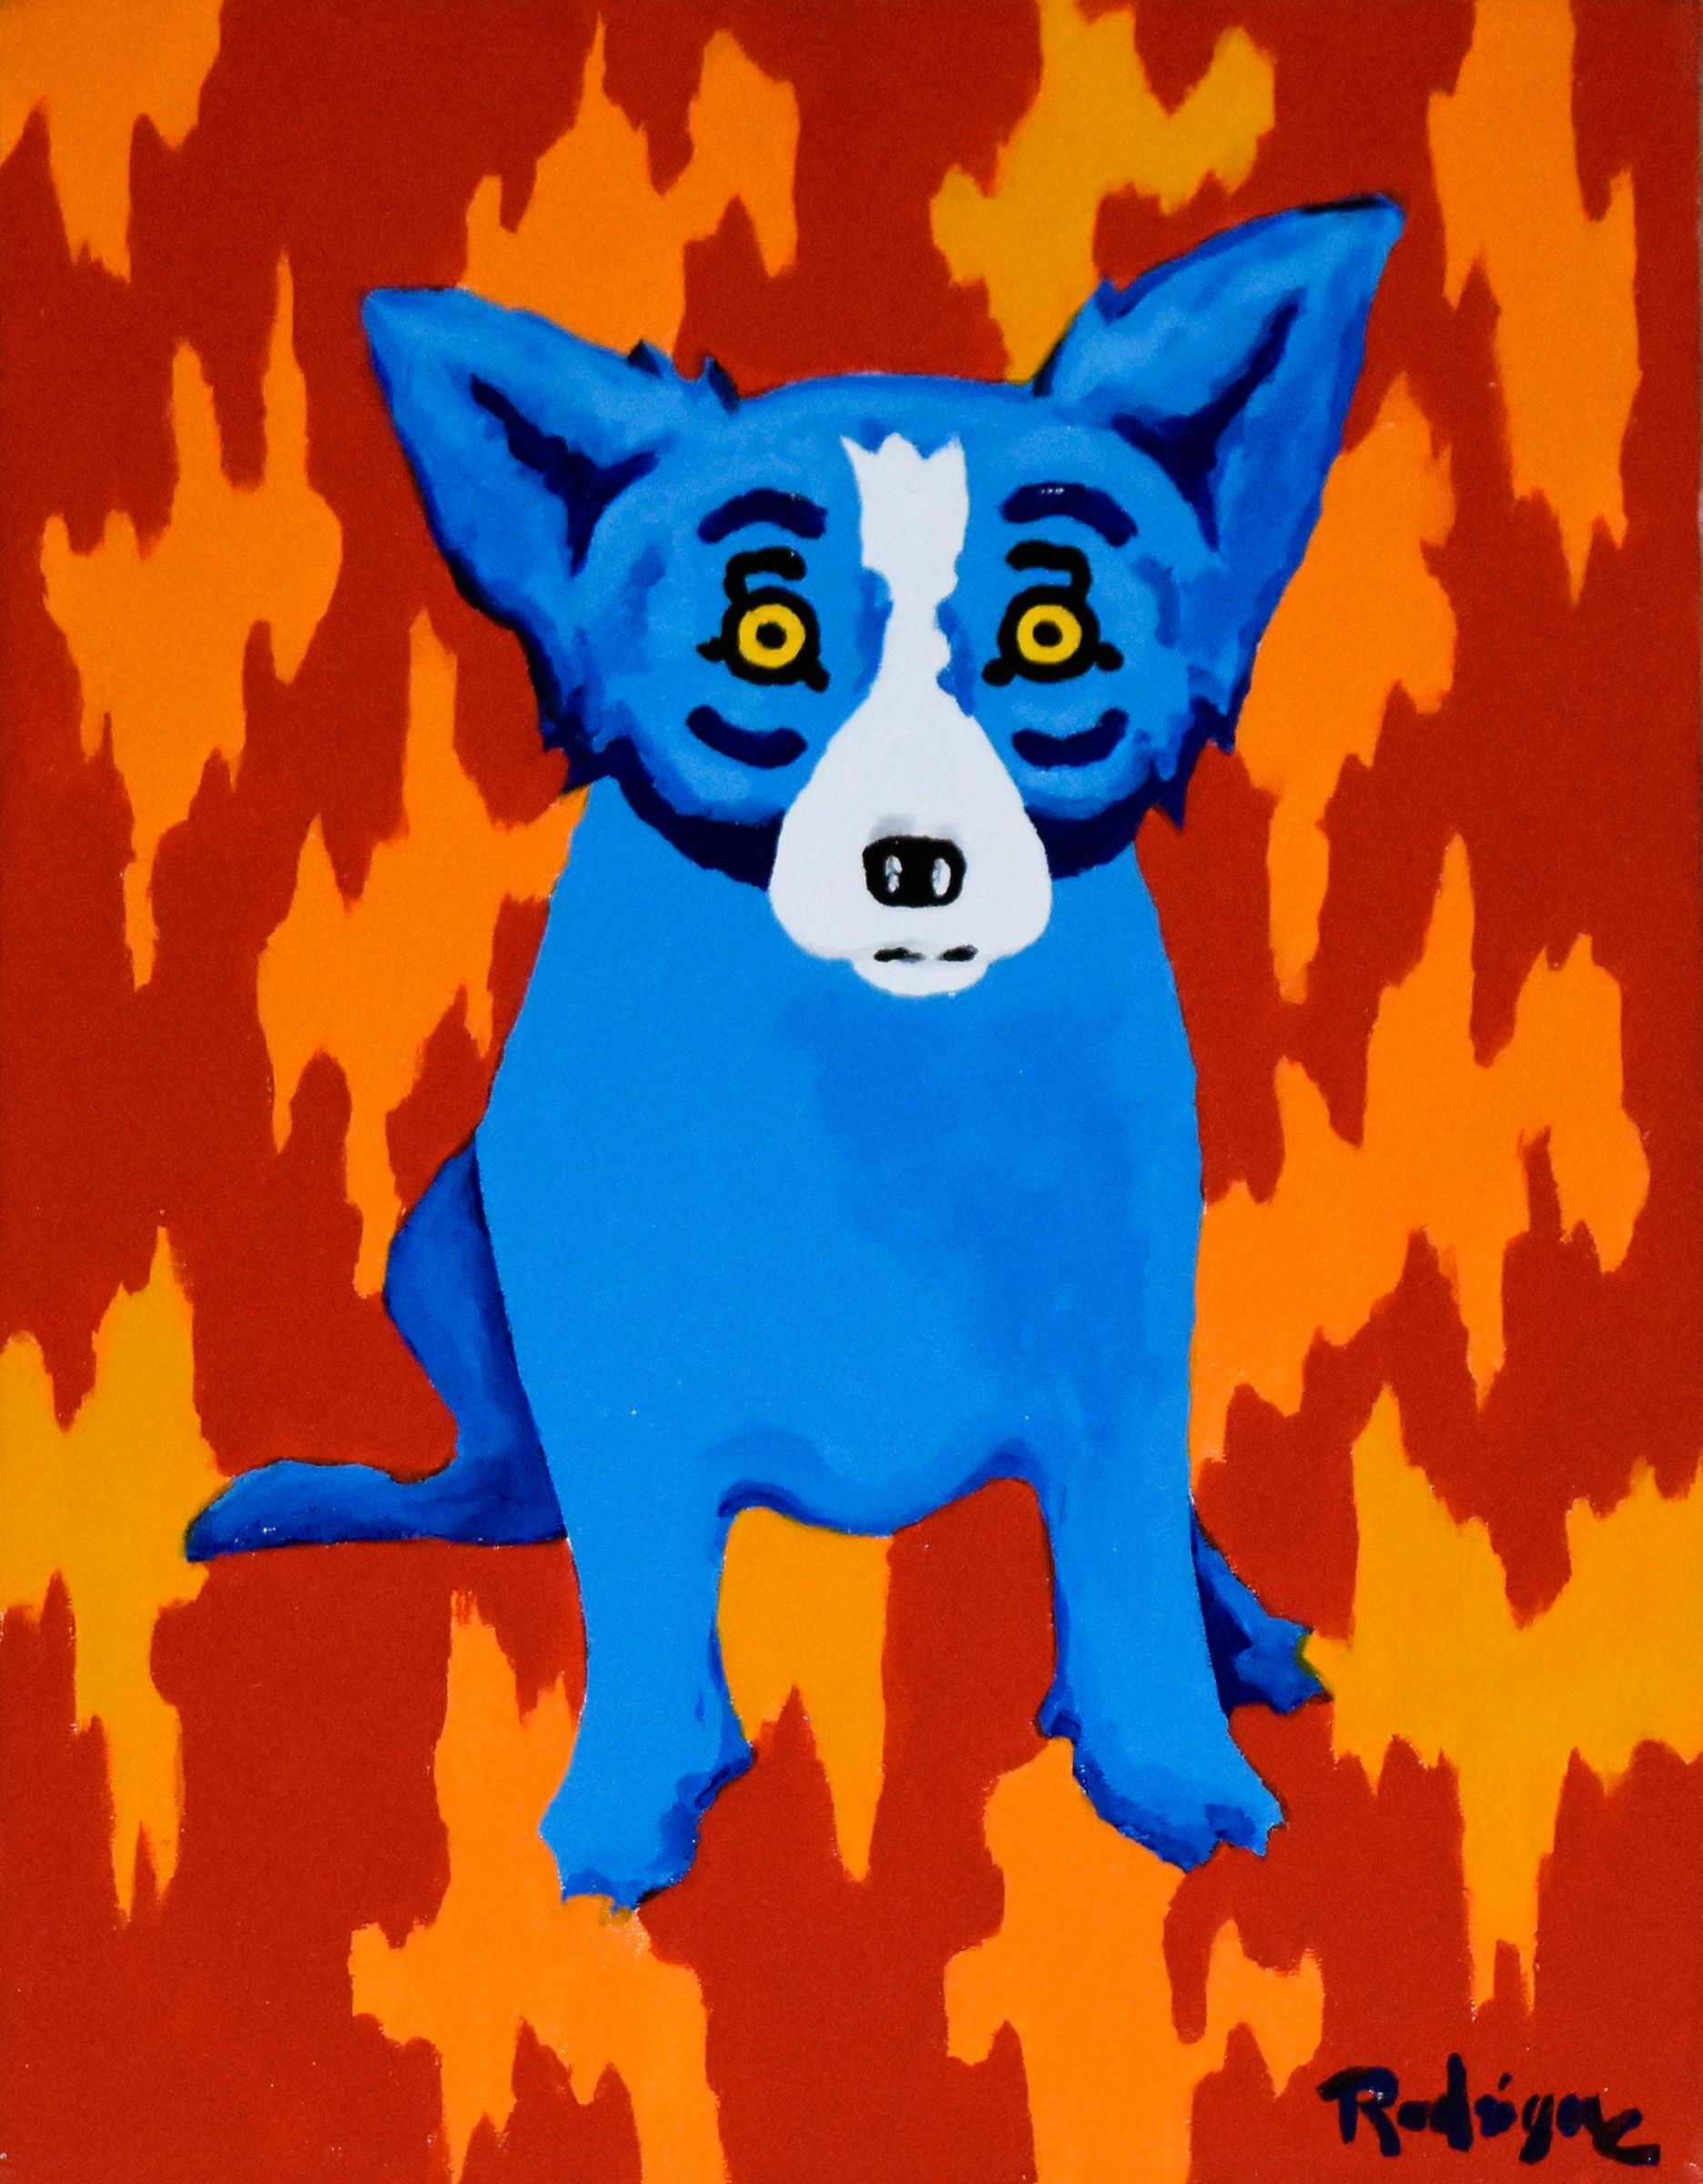 George Rodrigue Animal Painting - Original - Fire Wall - Signed Acrylic on Canvas - Blue Dog